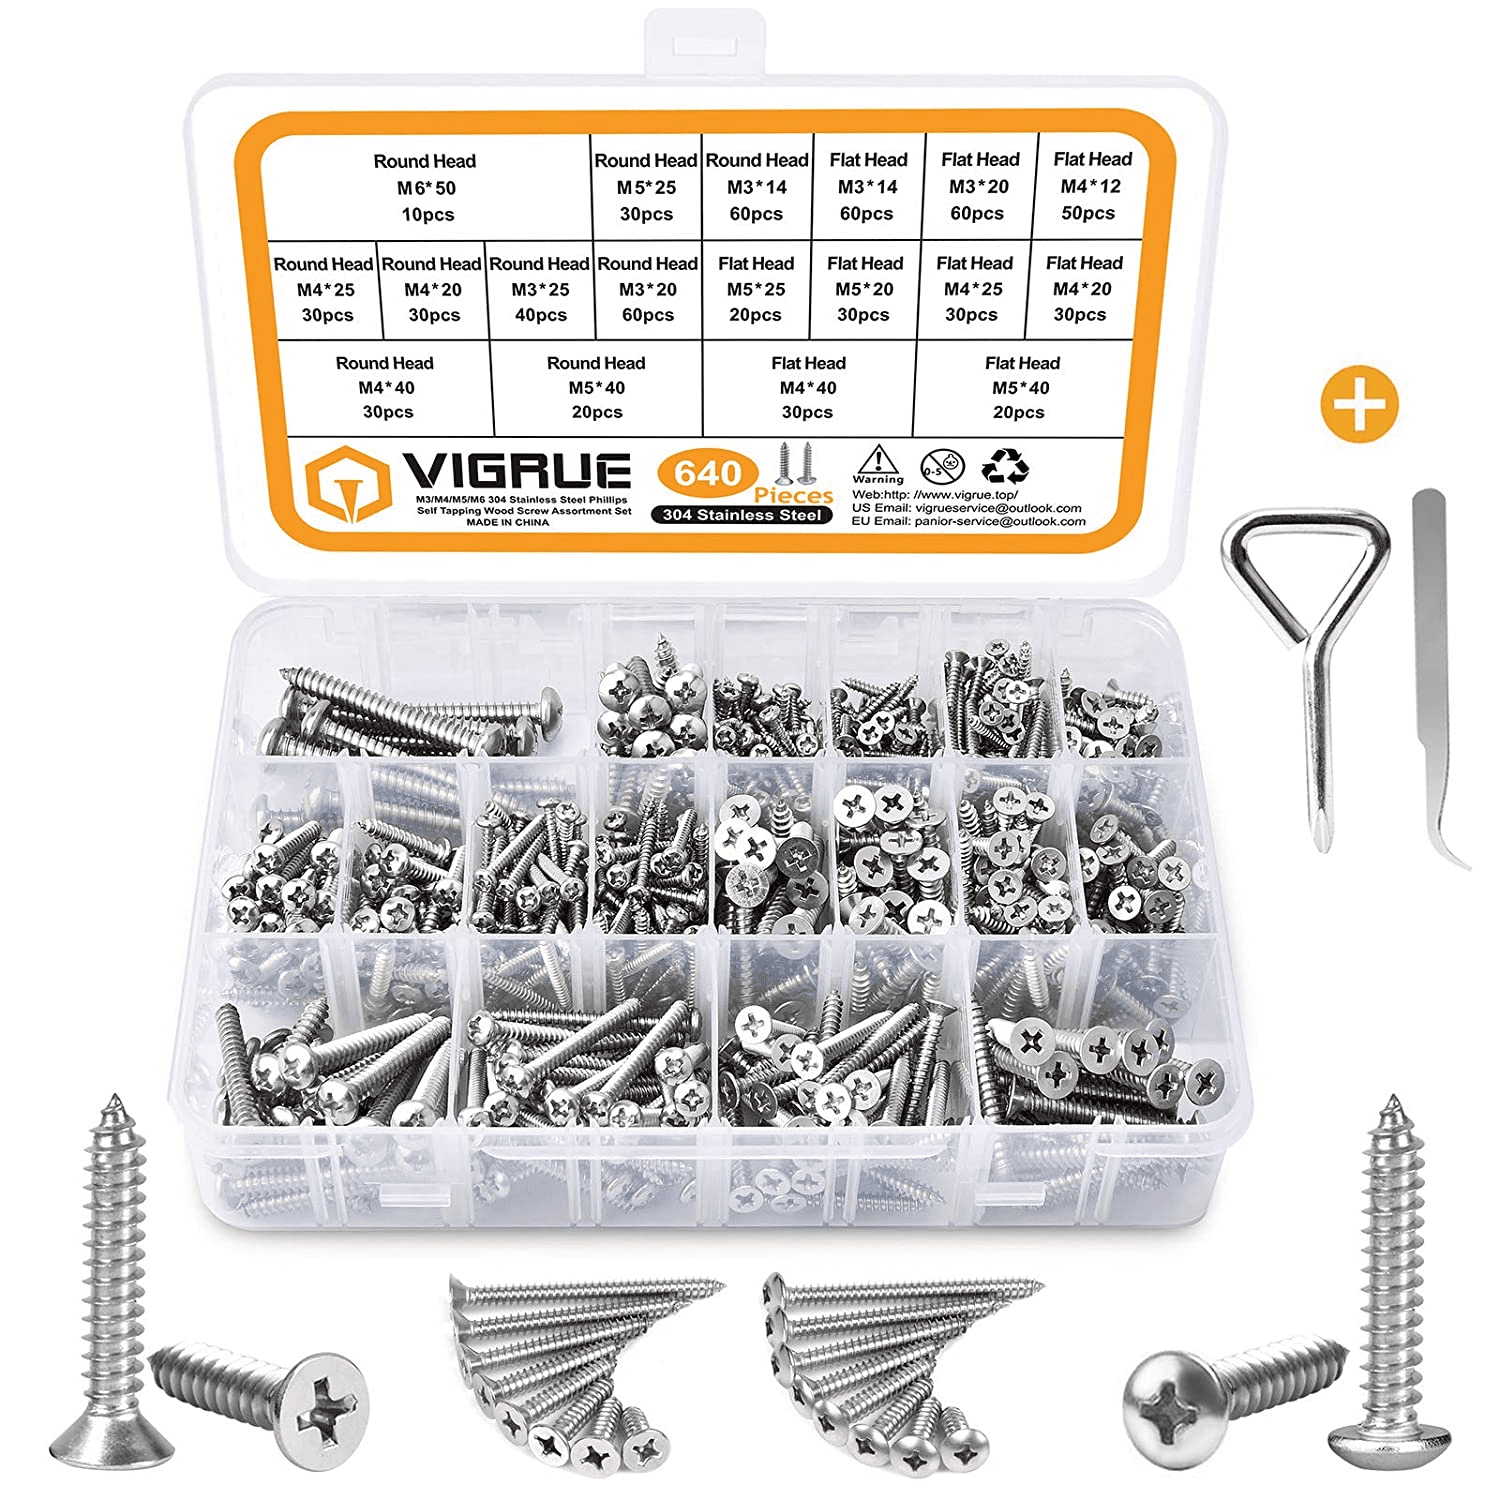 12 Kinds 600Pcs of Small Stainless Steel Screws Electronics Nuts Assortment for Home Tool Kit Color : 1000Pcs Round